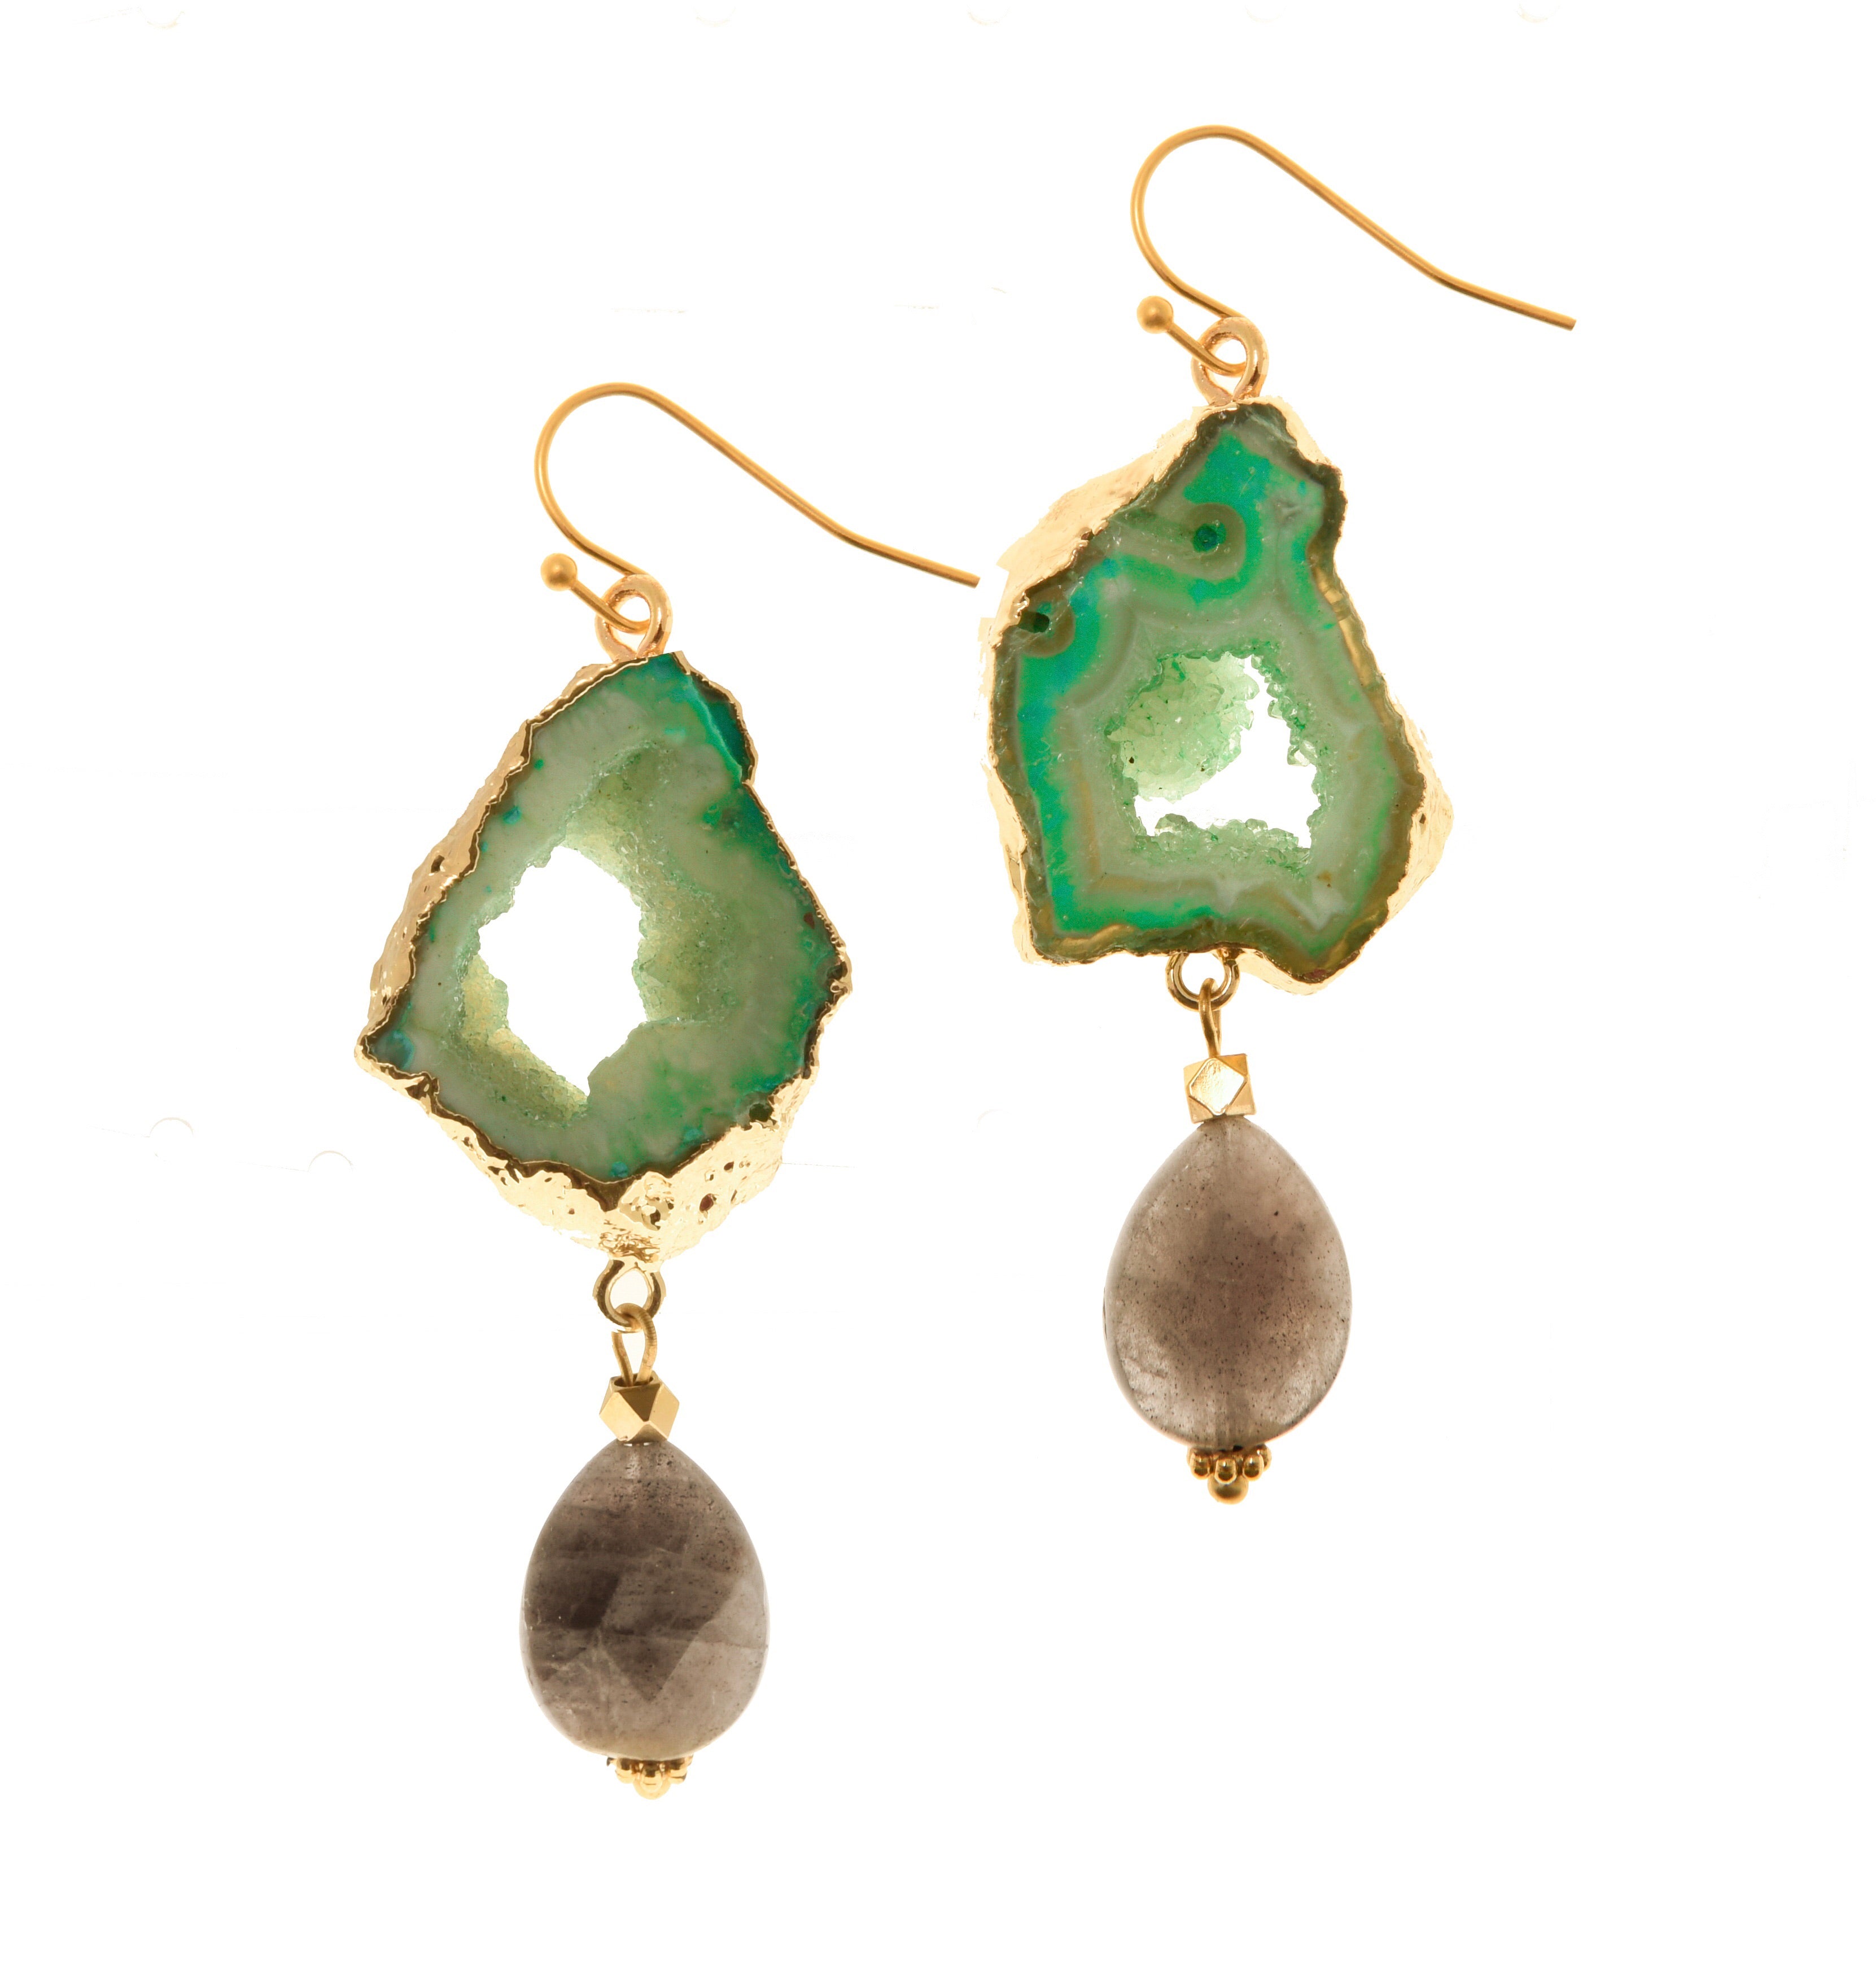 Aria-V Cameo earrings, handcrafted with teardrop faceted labradorite and mint green geode slices electroplated in gold